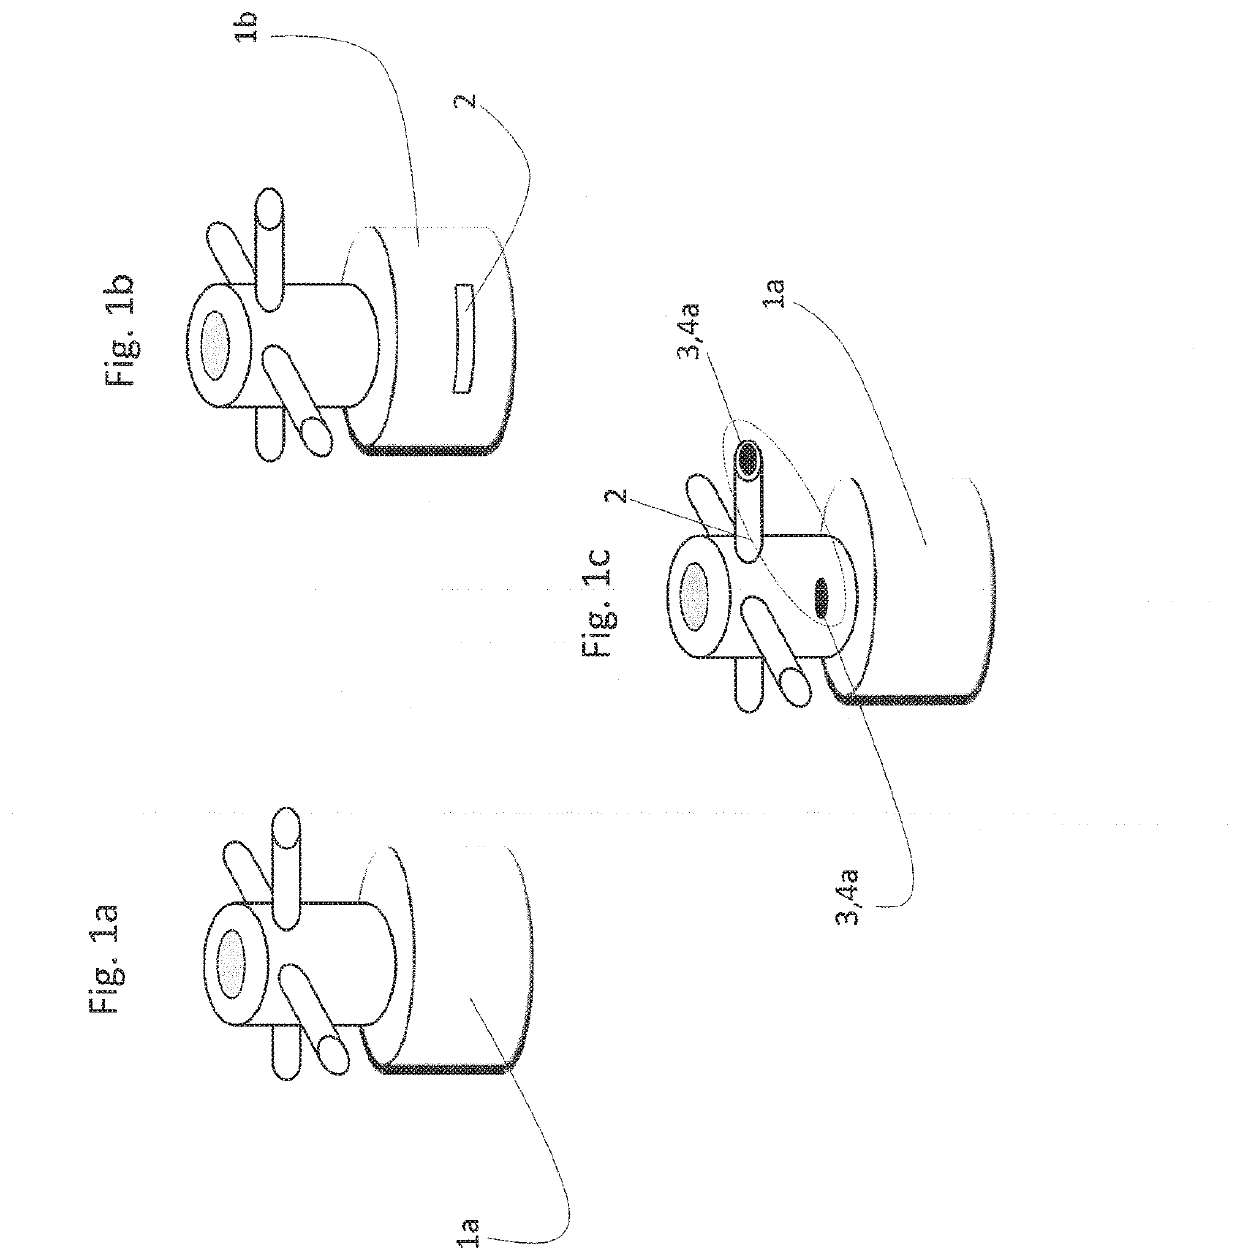 Three-Dimensional Printing Method for Producing a Product Protected Against Forgery by Means of a Security Feature